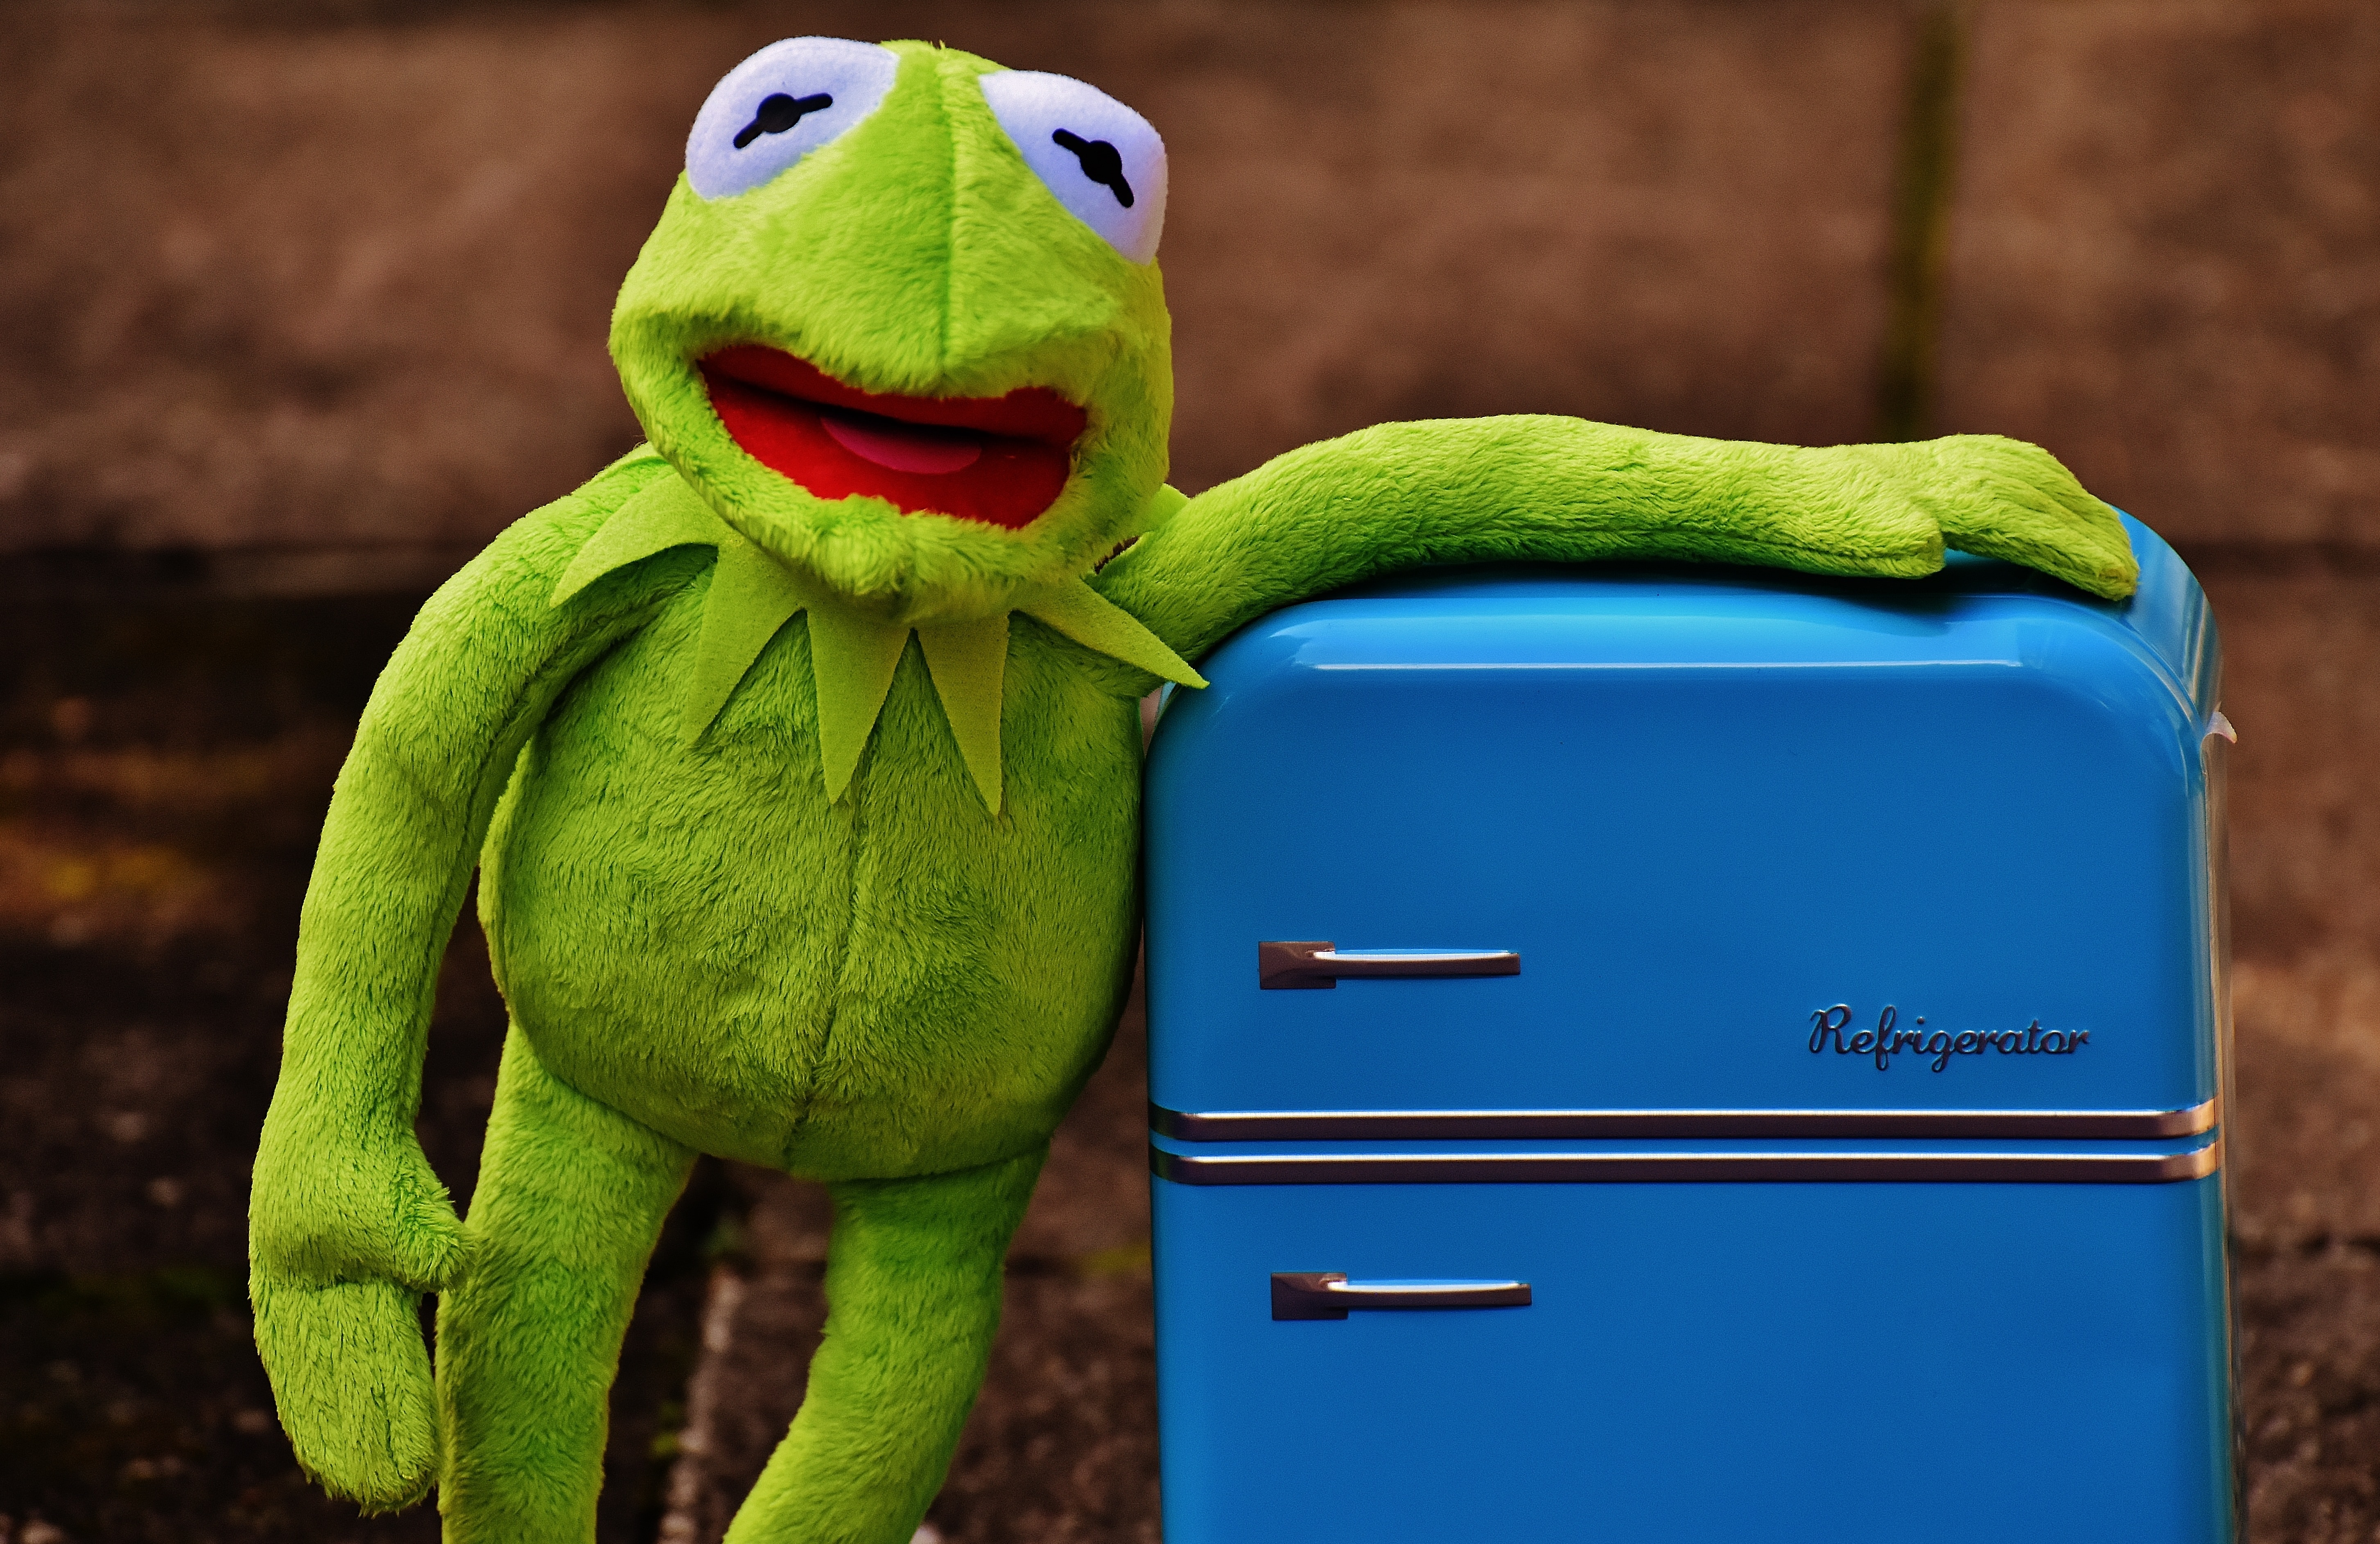 green frog plush toy and refrigerator